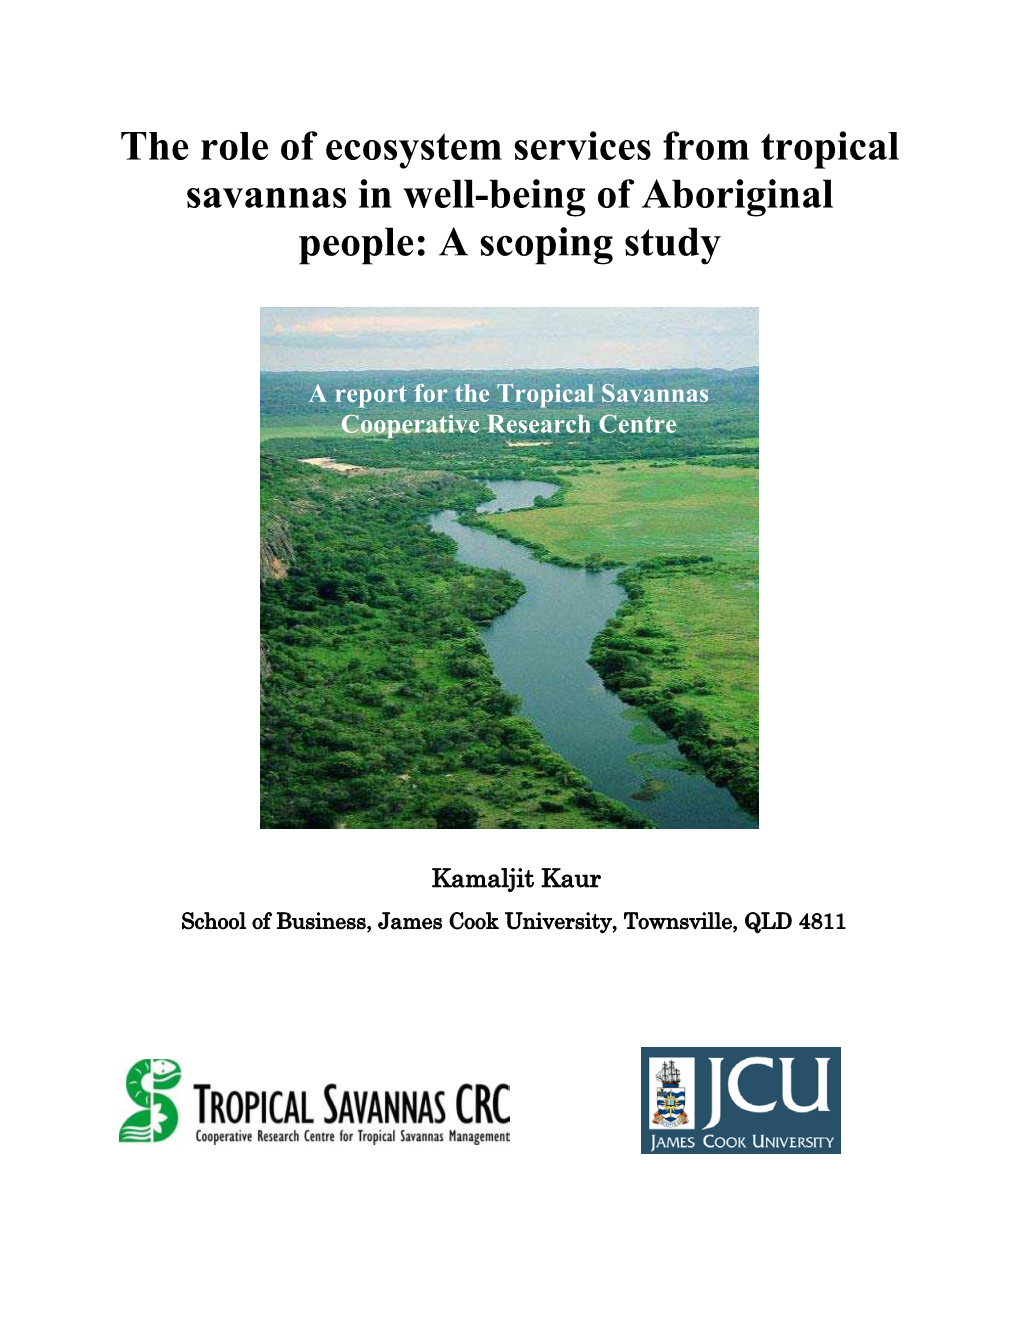 The Role of Ecosystem Services from Tropical Savannas in Well-Being of Aboriginal People: a Scoping Study